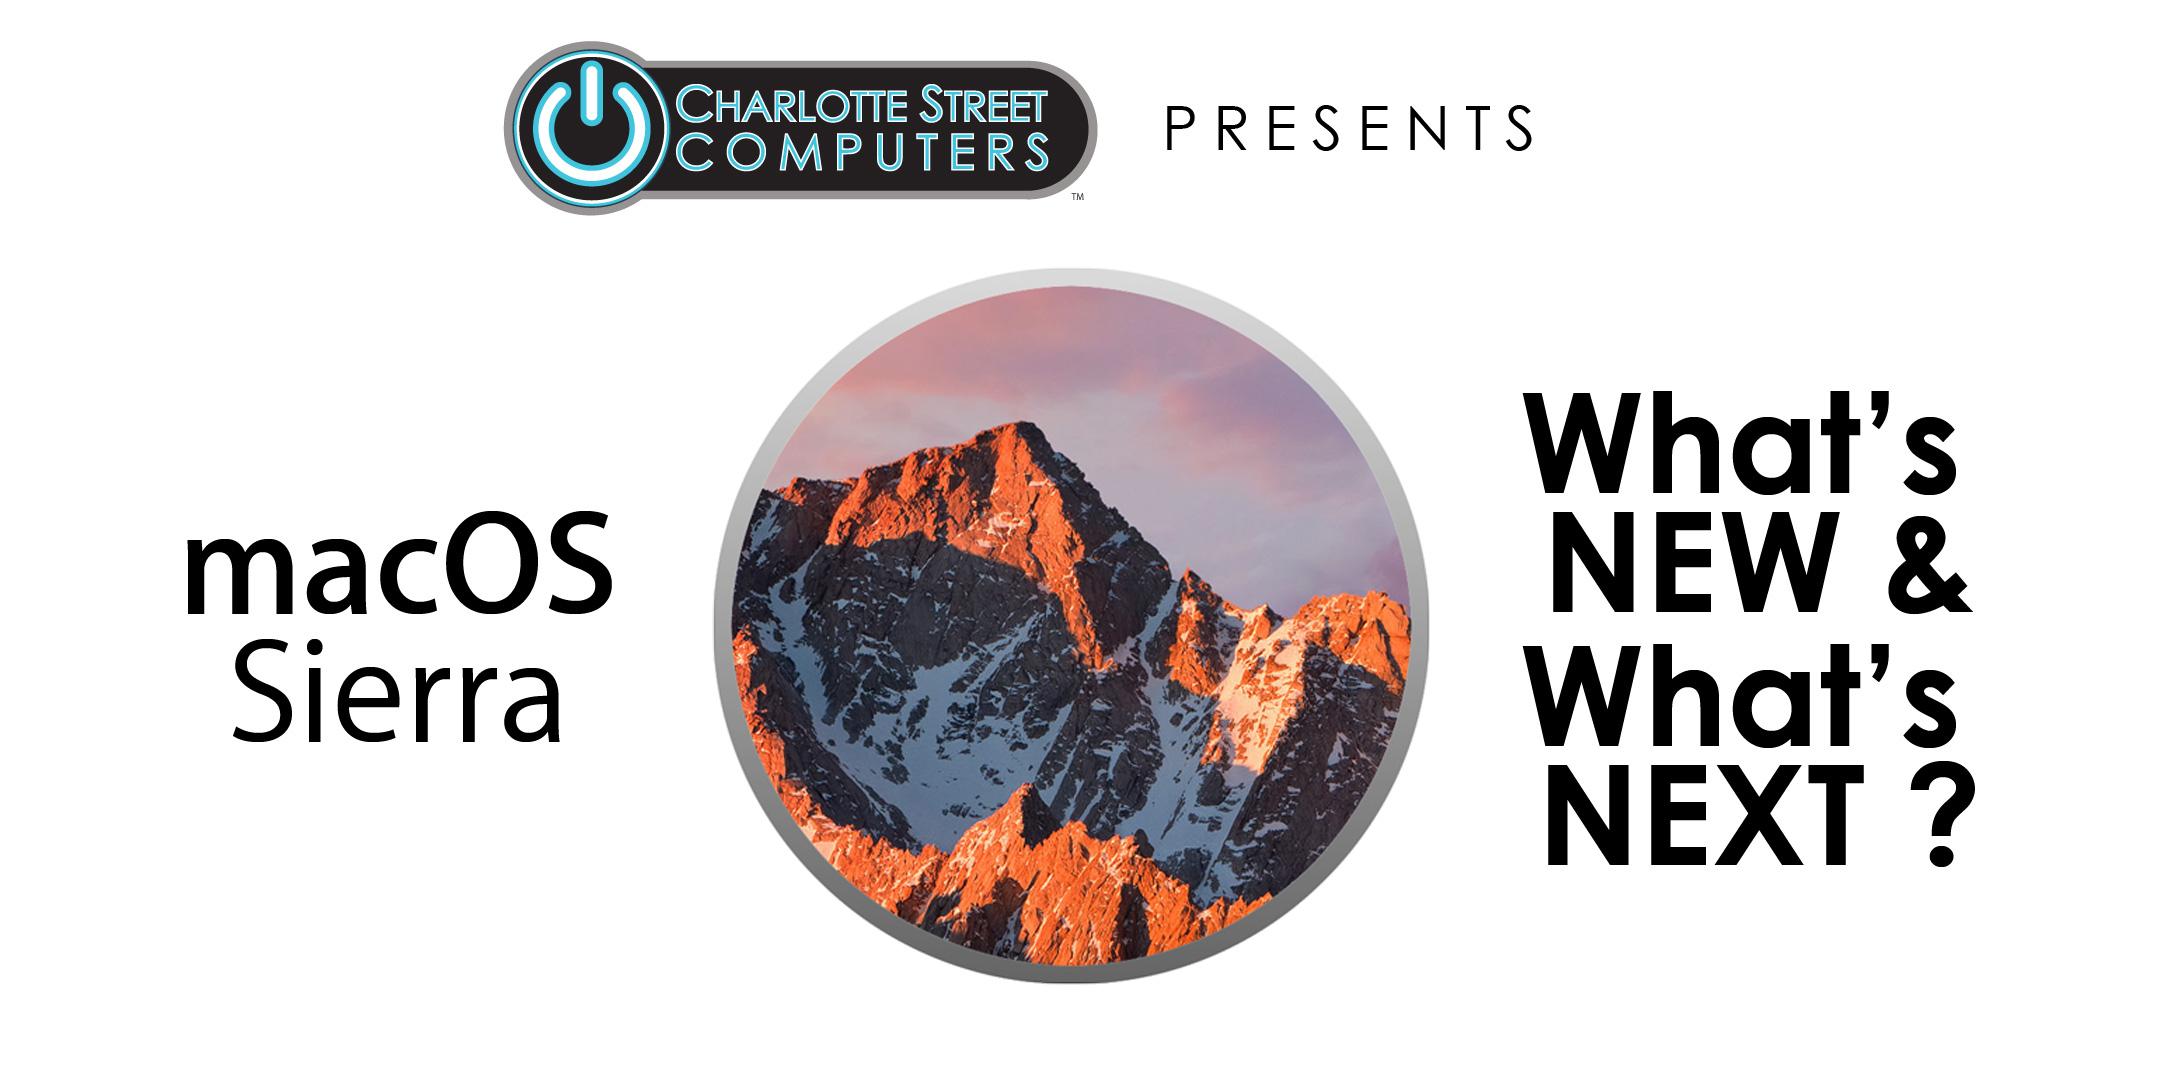 macOS Sierra: What's New and What's Next? FREE SEMINAR